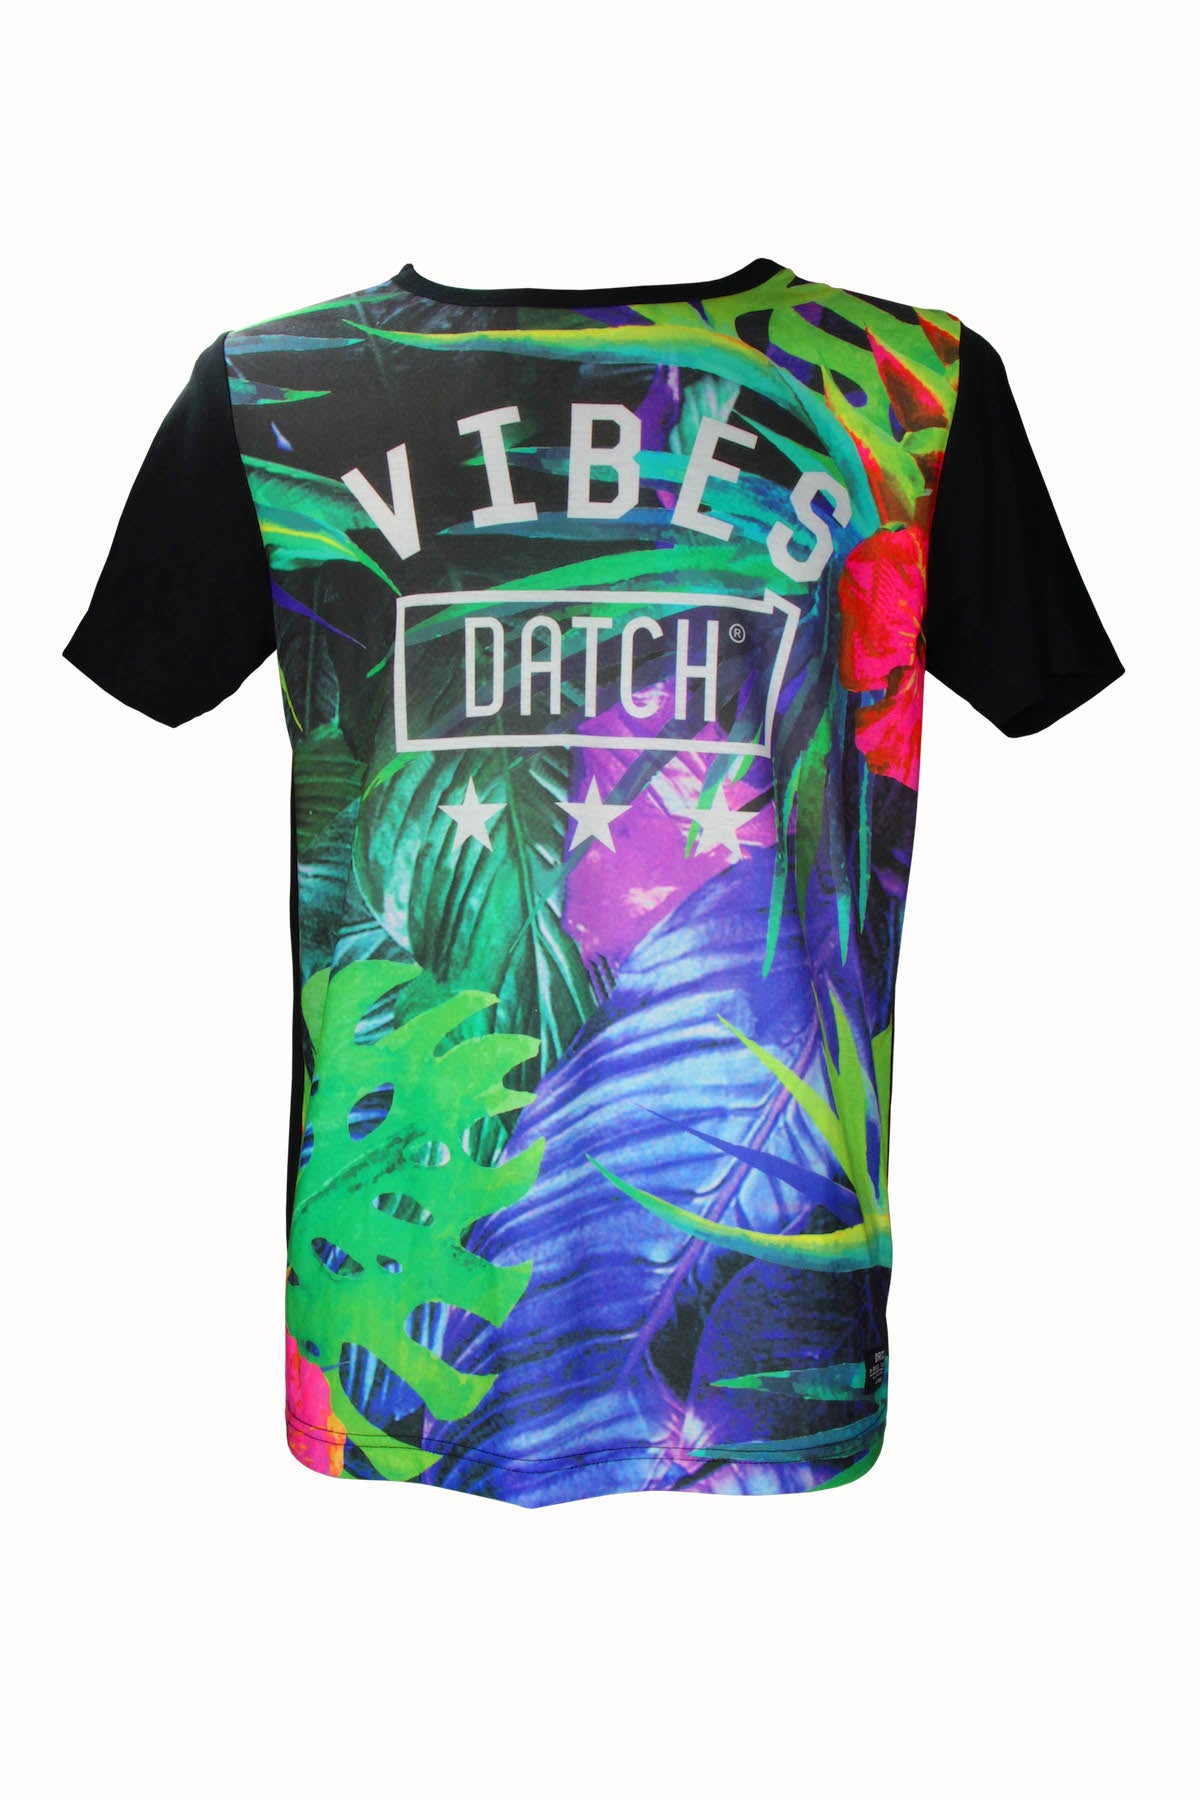 Datch Vibrant Tree Forest T-Shirt